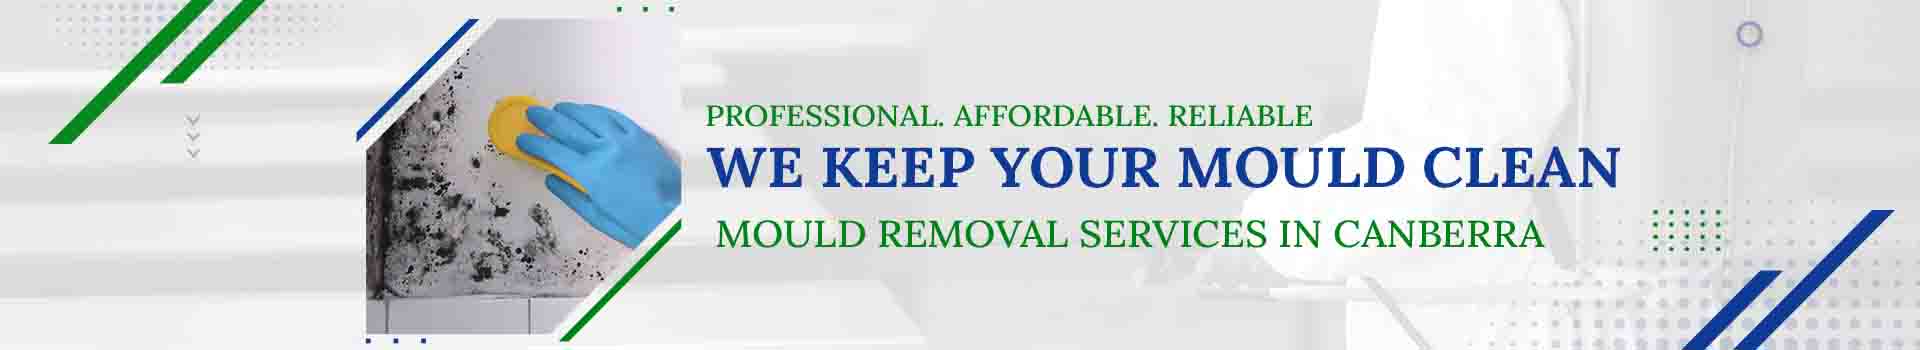 banner of mould removal service in canberra